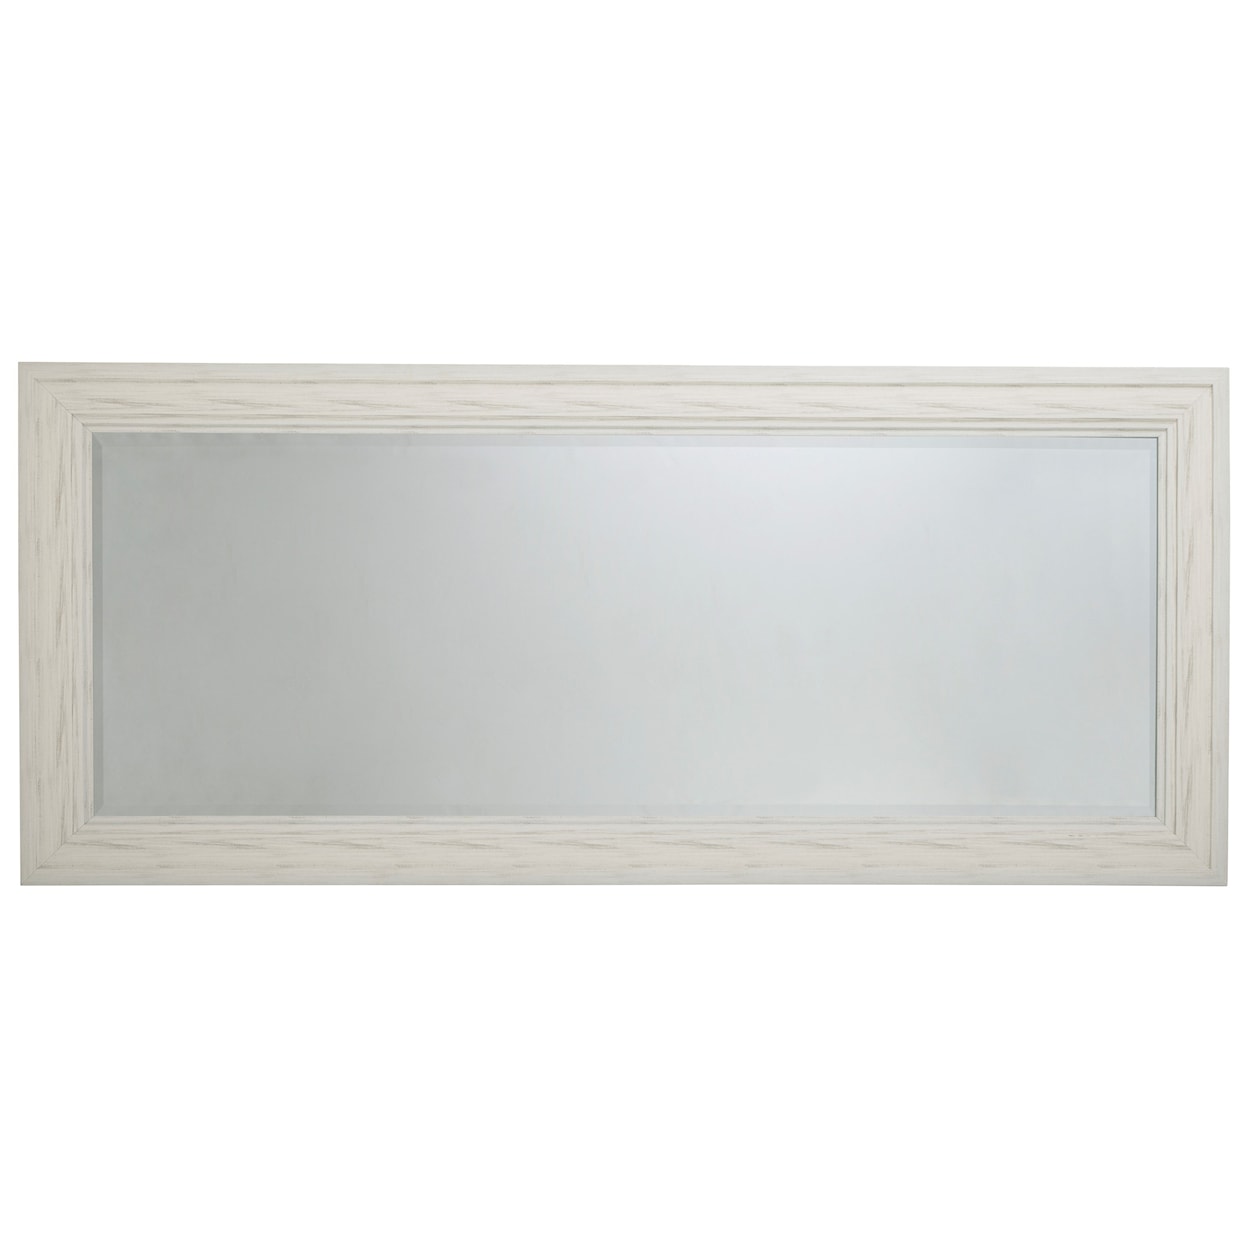 Signature Design by Ashley Accent Mirrors Jacee Antique White Floor Mirror